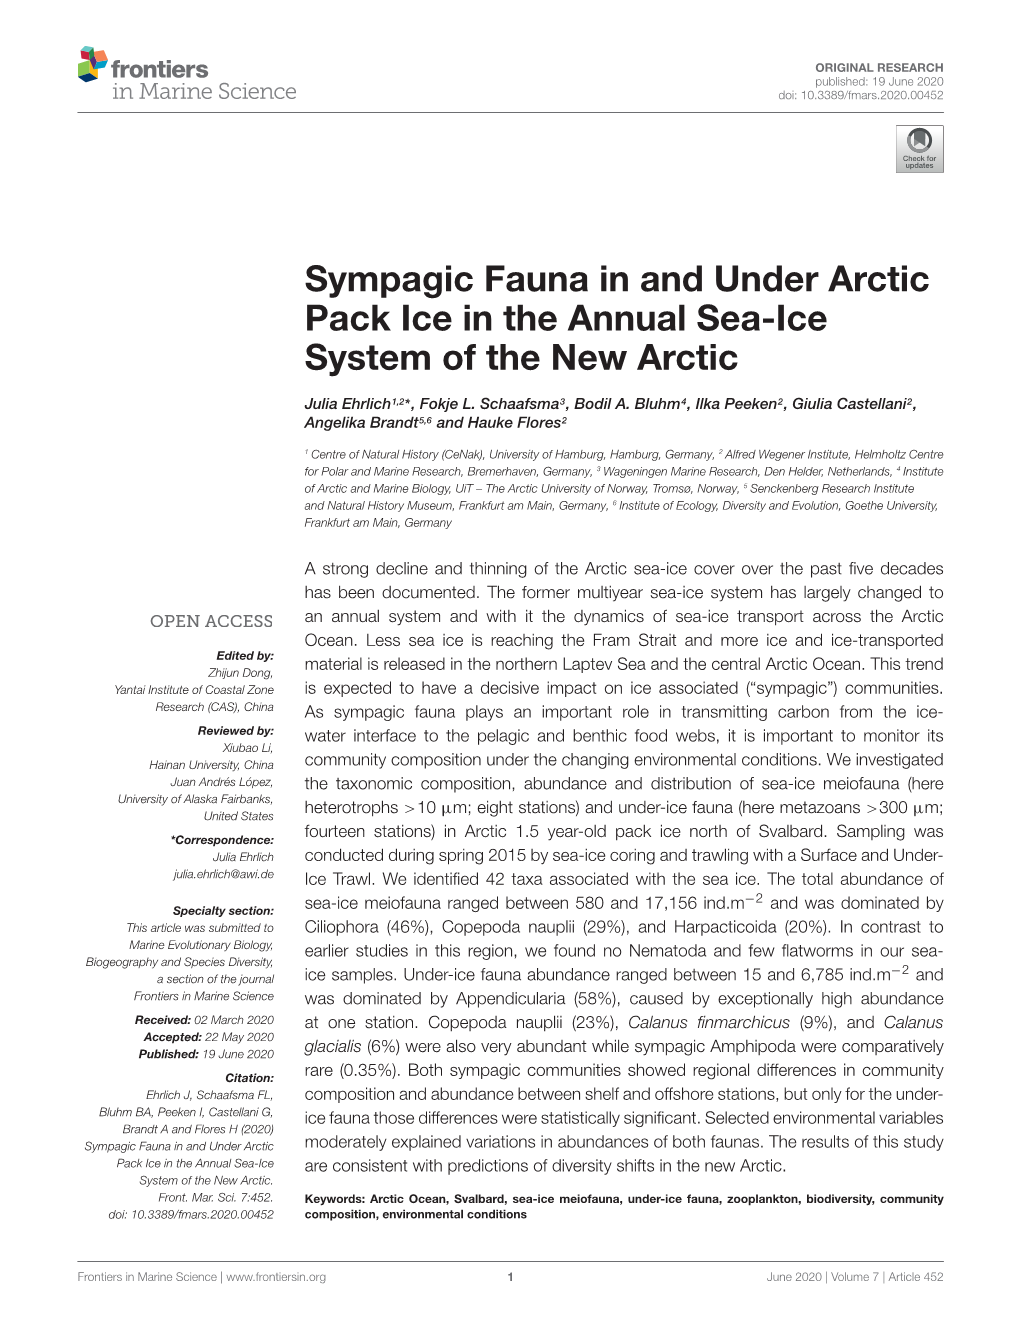 Sympagic Fauna in and Under Arctic Pack Ice in the Annual Sea-Ice System of the New Arctic